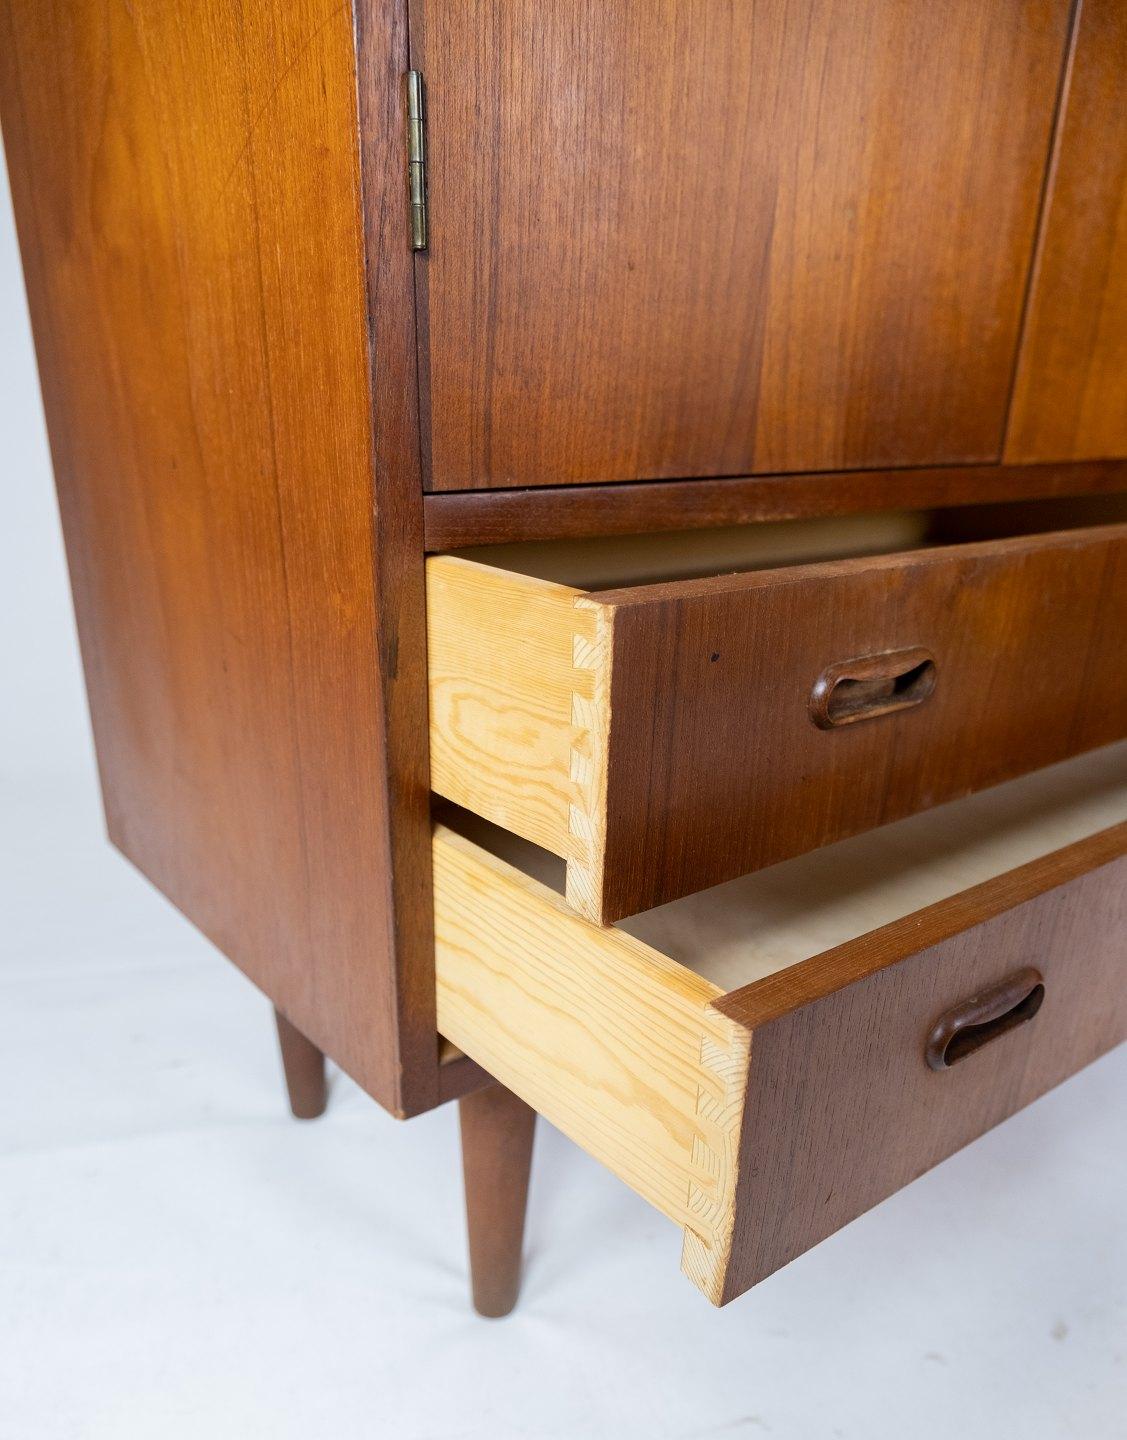 Mid-20th Century Cabinet in Teak of Danish Design from the 1960s, the Cabinet Is in Great Vintage